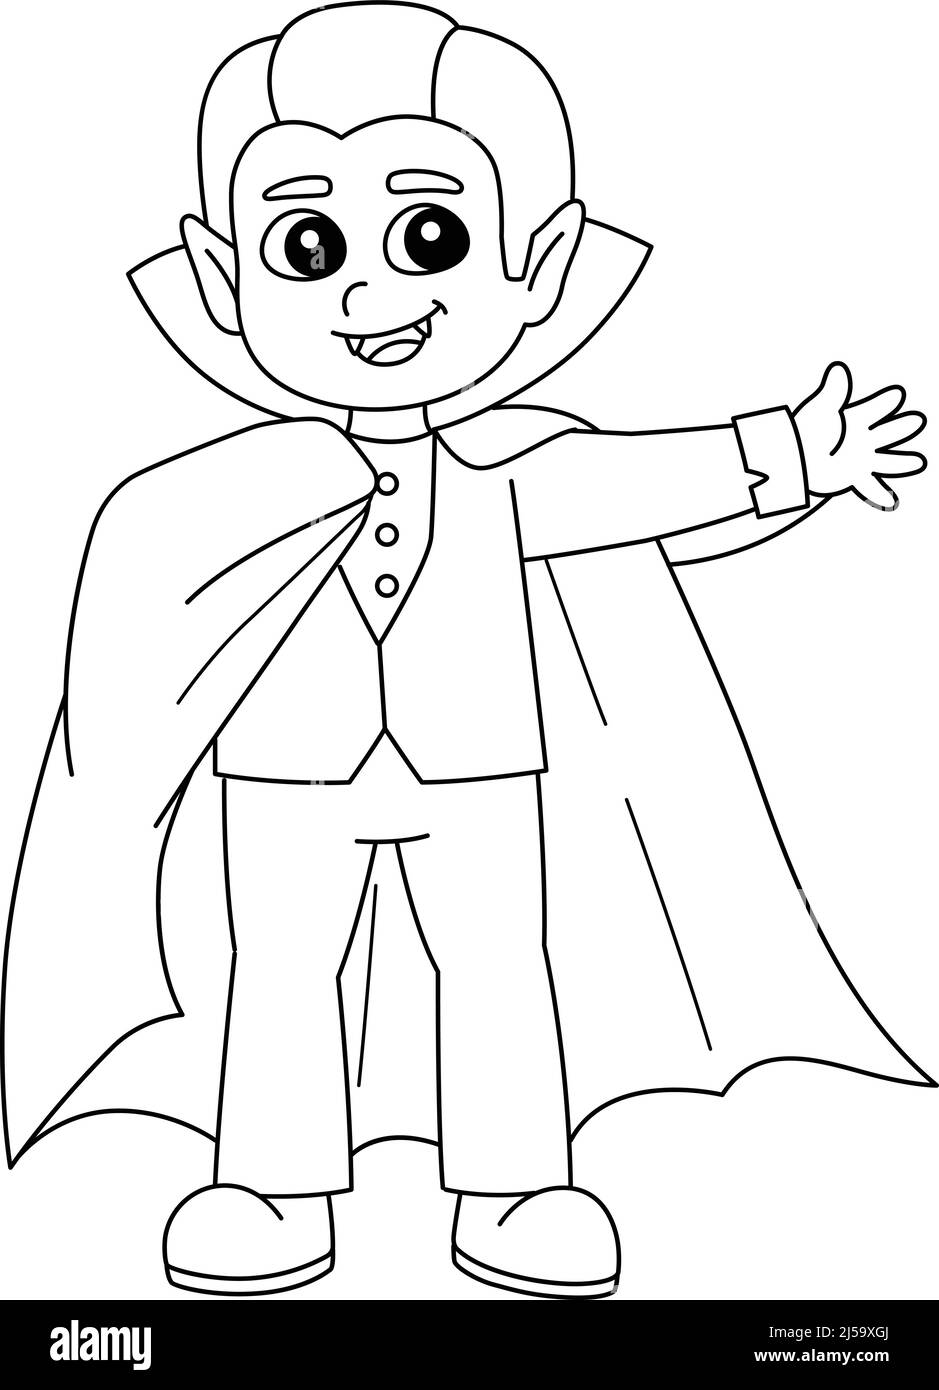 Vampire Halloween Coloring Page Isolated for Kids Stock Vector Image ...